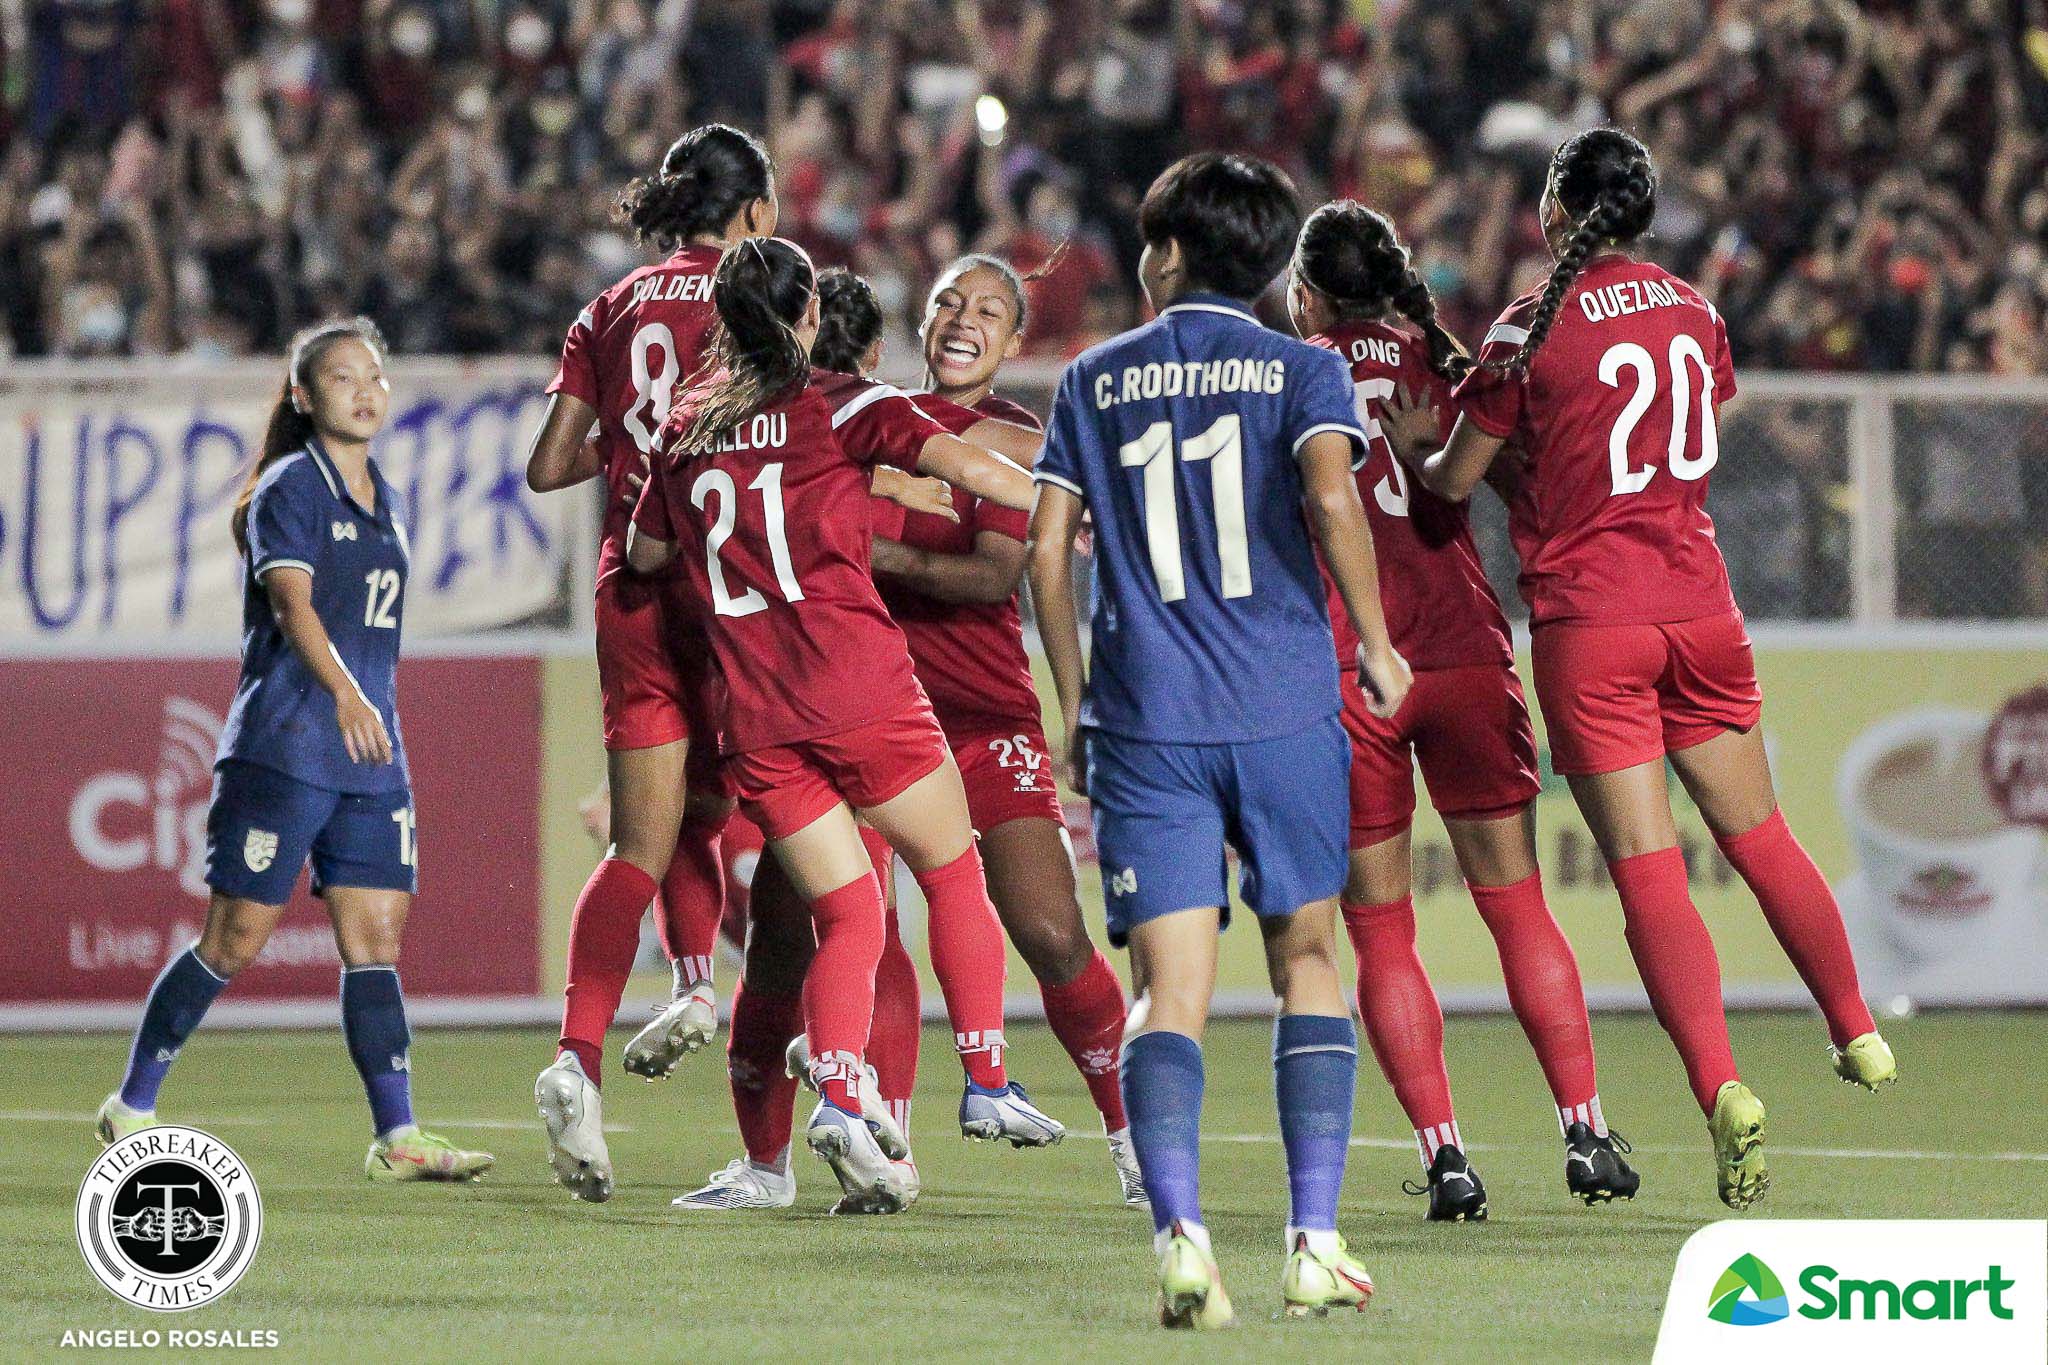 2022-AFF-Womens-Championship-Philippines-vs-Thailand-Finals-PH-Celeb-2 Sarina Bolden pays tribute to past Malditas that paved way for Filipinas 2022 AFF Women’s Championship Filipinas Football News  - philippine sports news